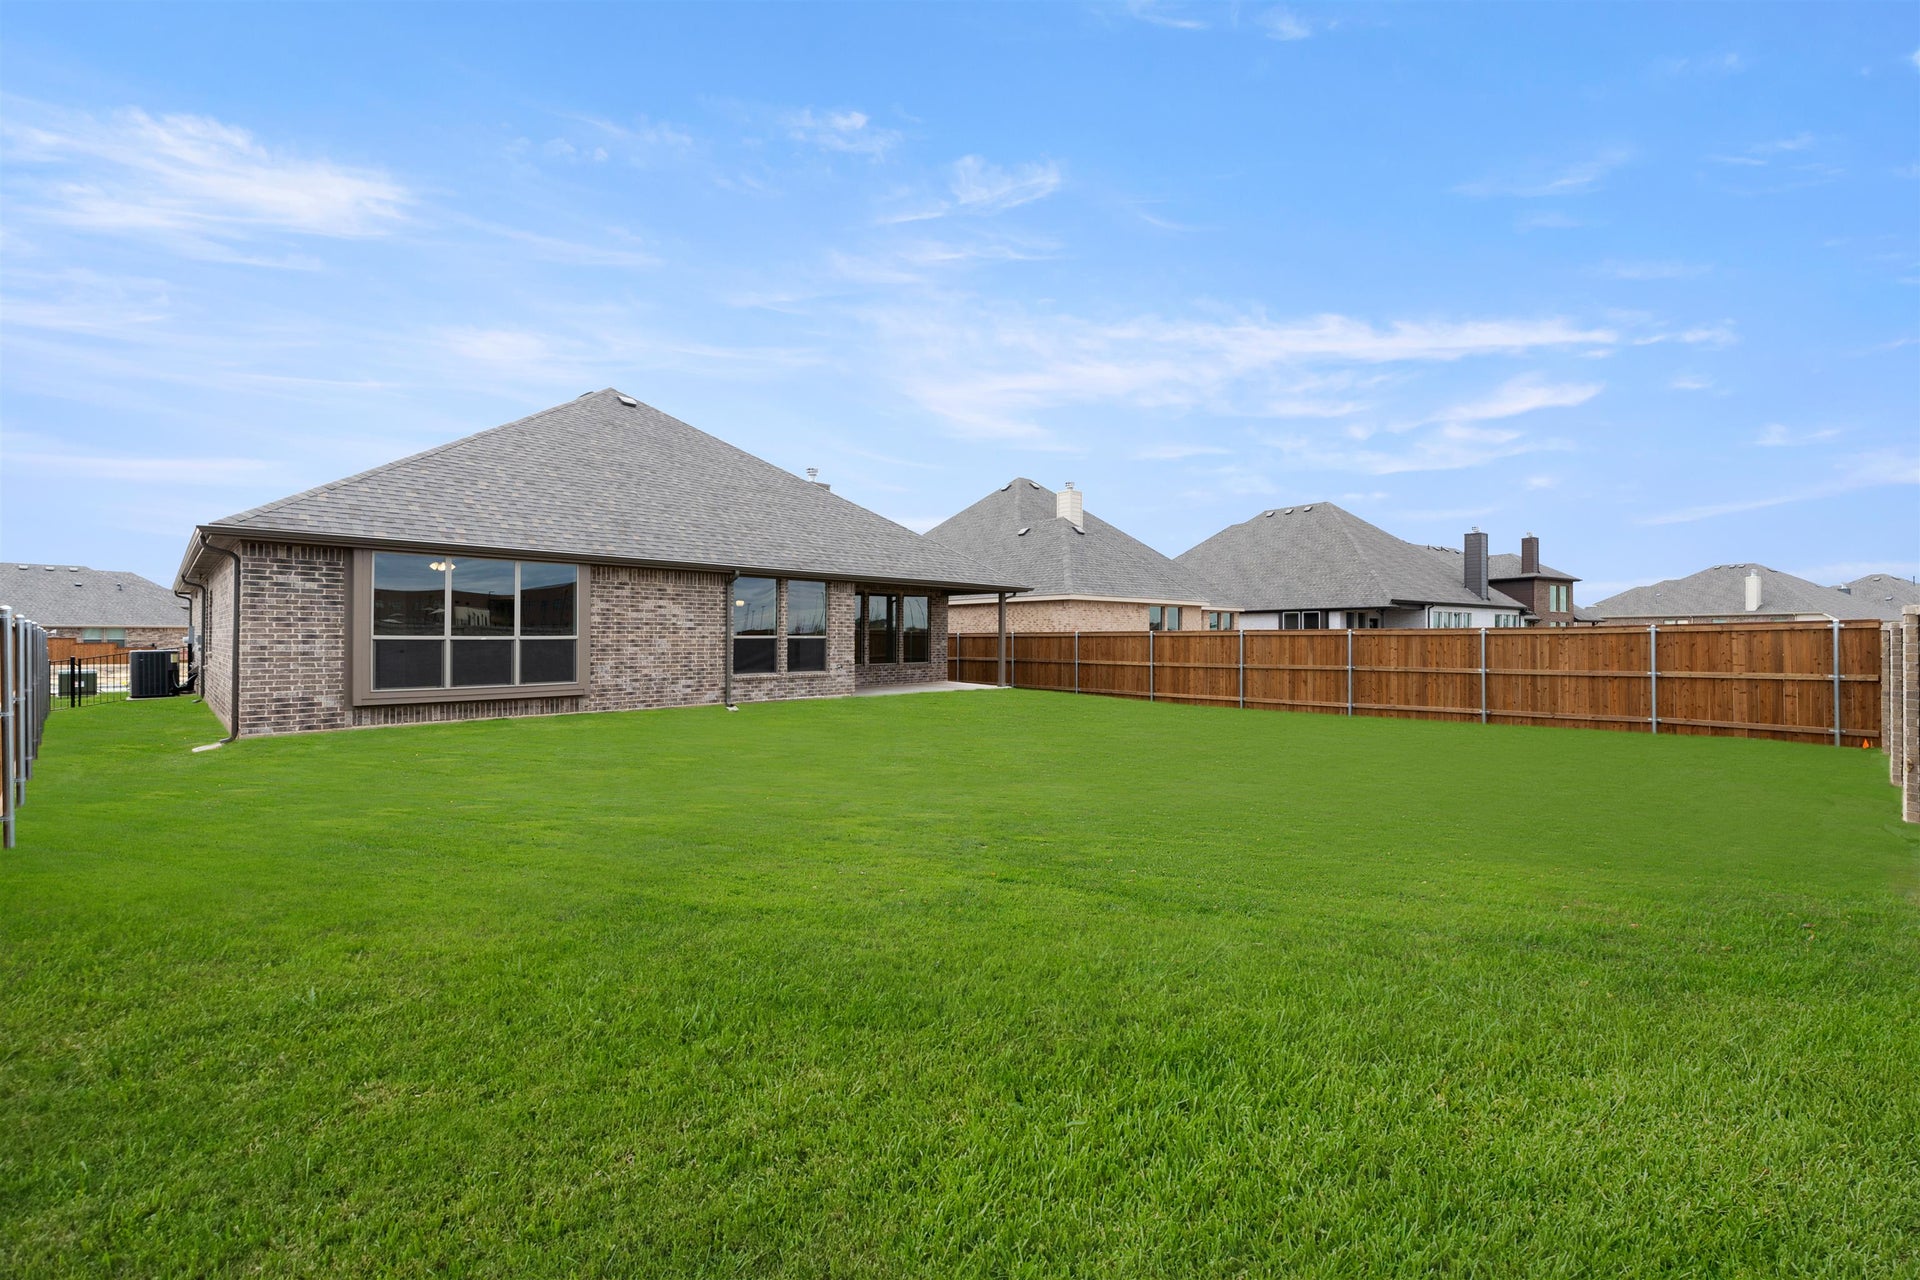 4br New Home in Cleburne, TX